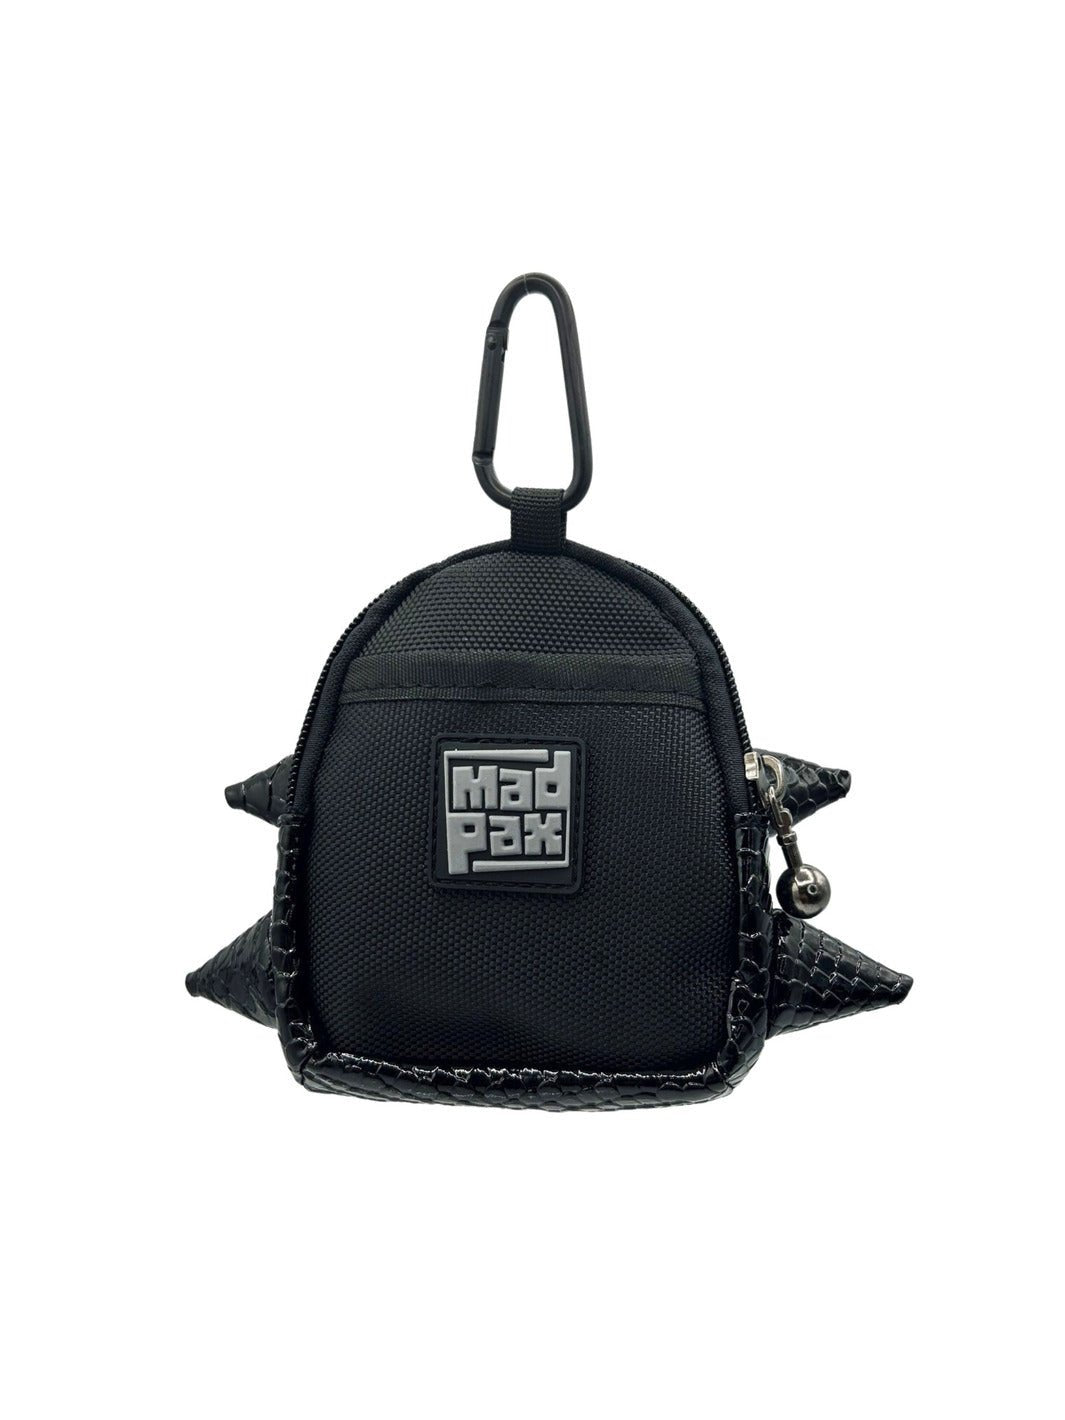 Black Out - Clip On Bag - Madpax